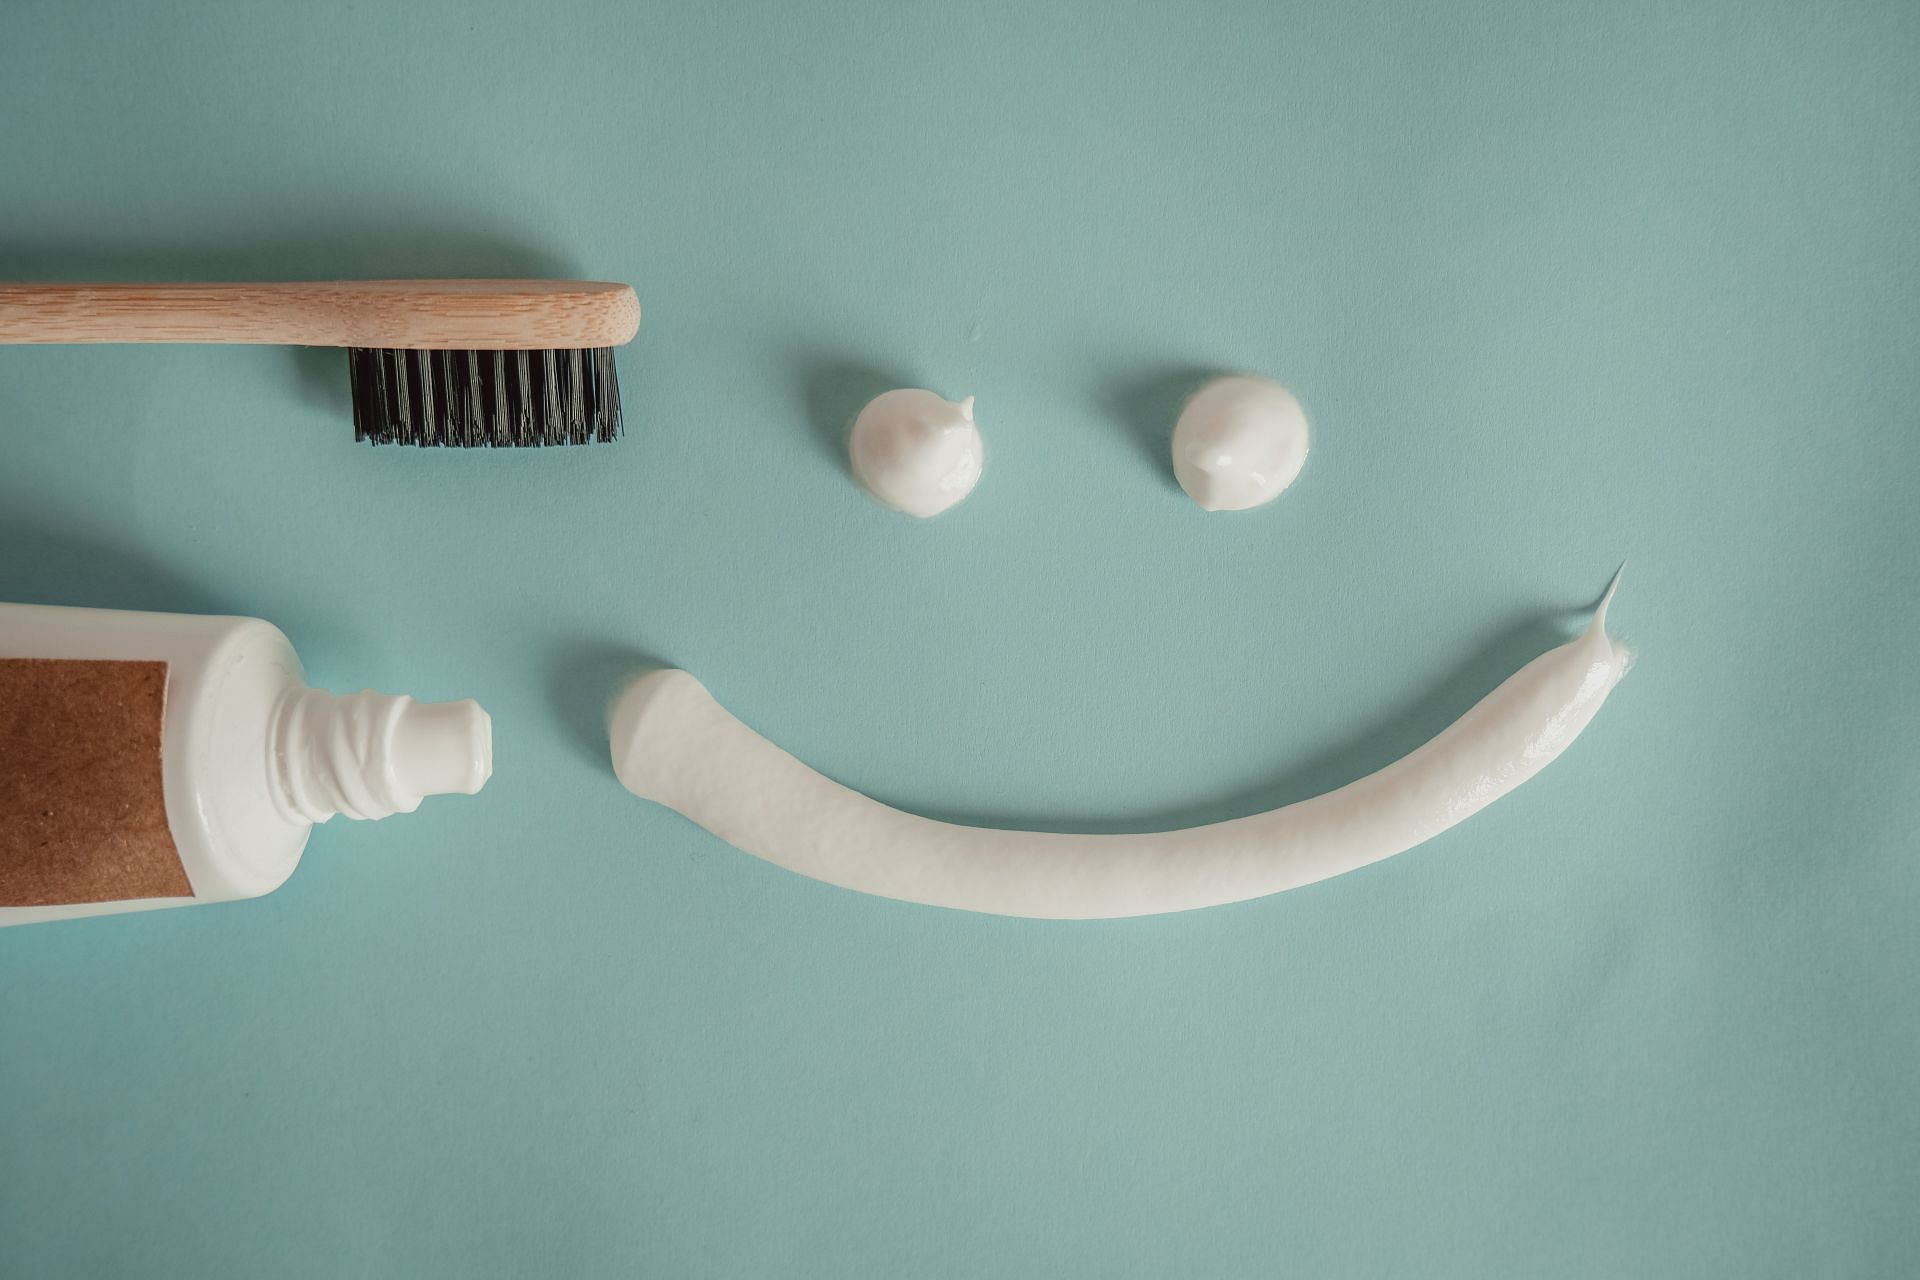 Fluoride works by remineralizing your enamel, making it stronger and more resistant to decay (Image via Pexels)